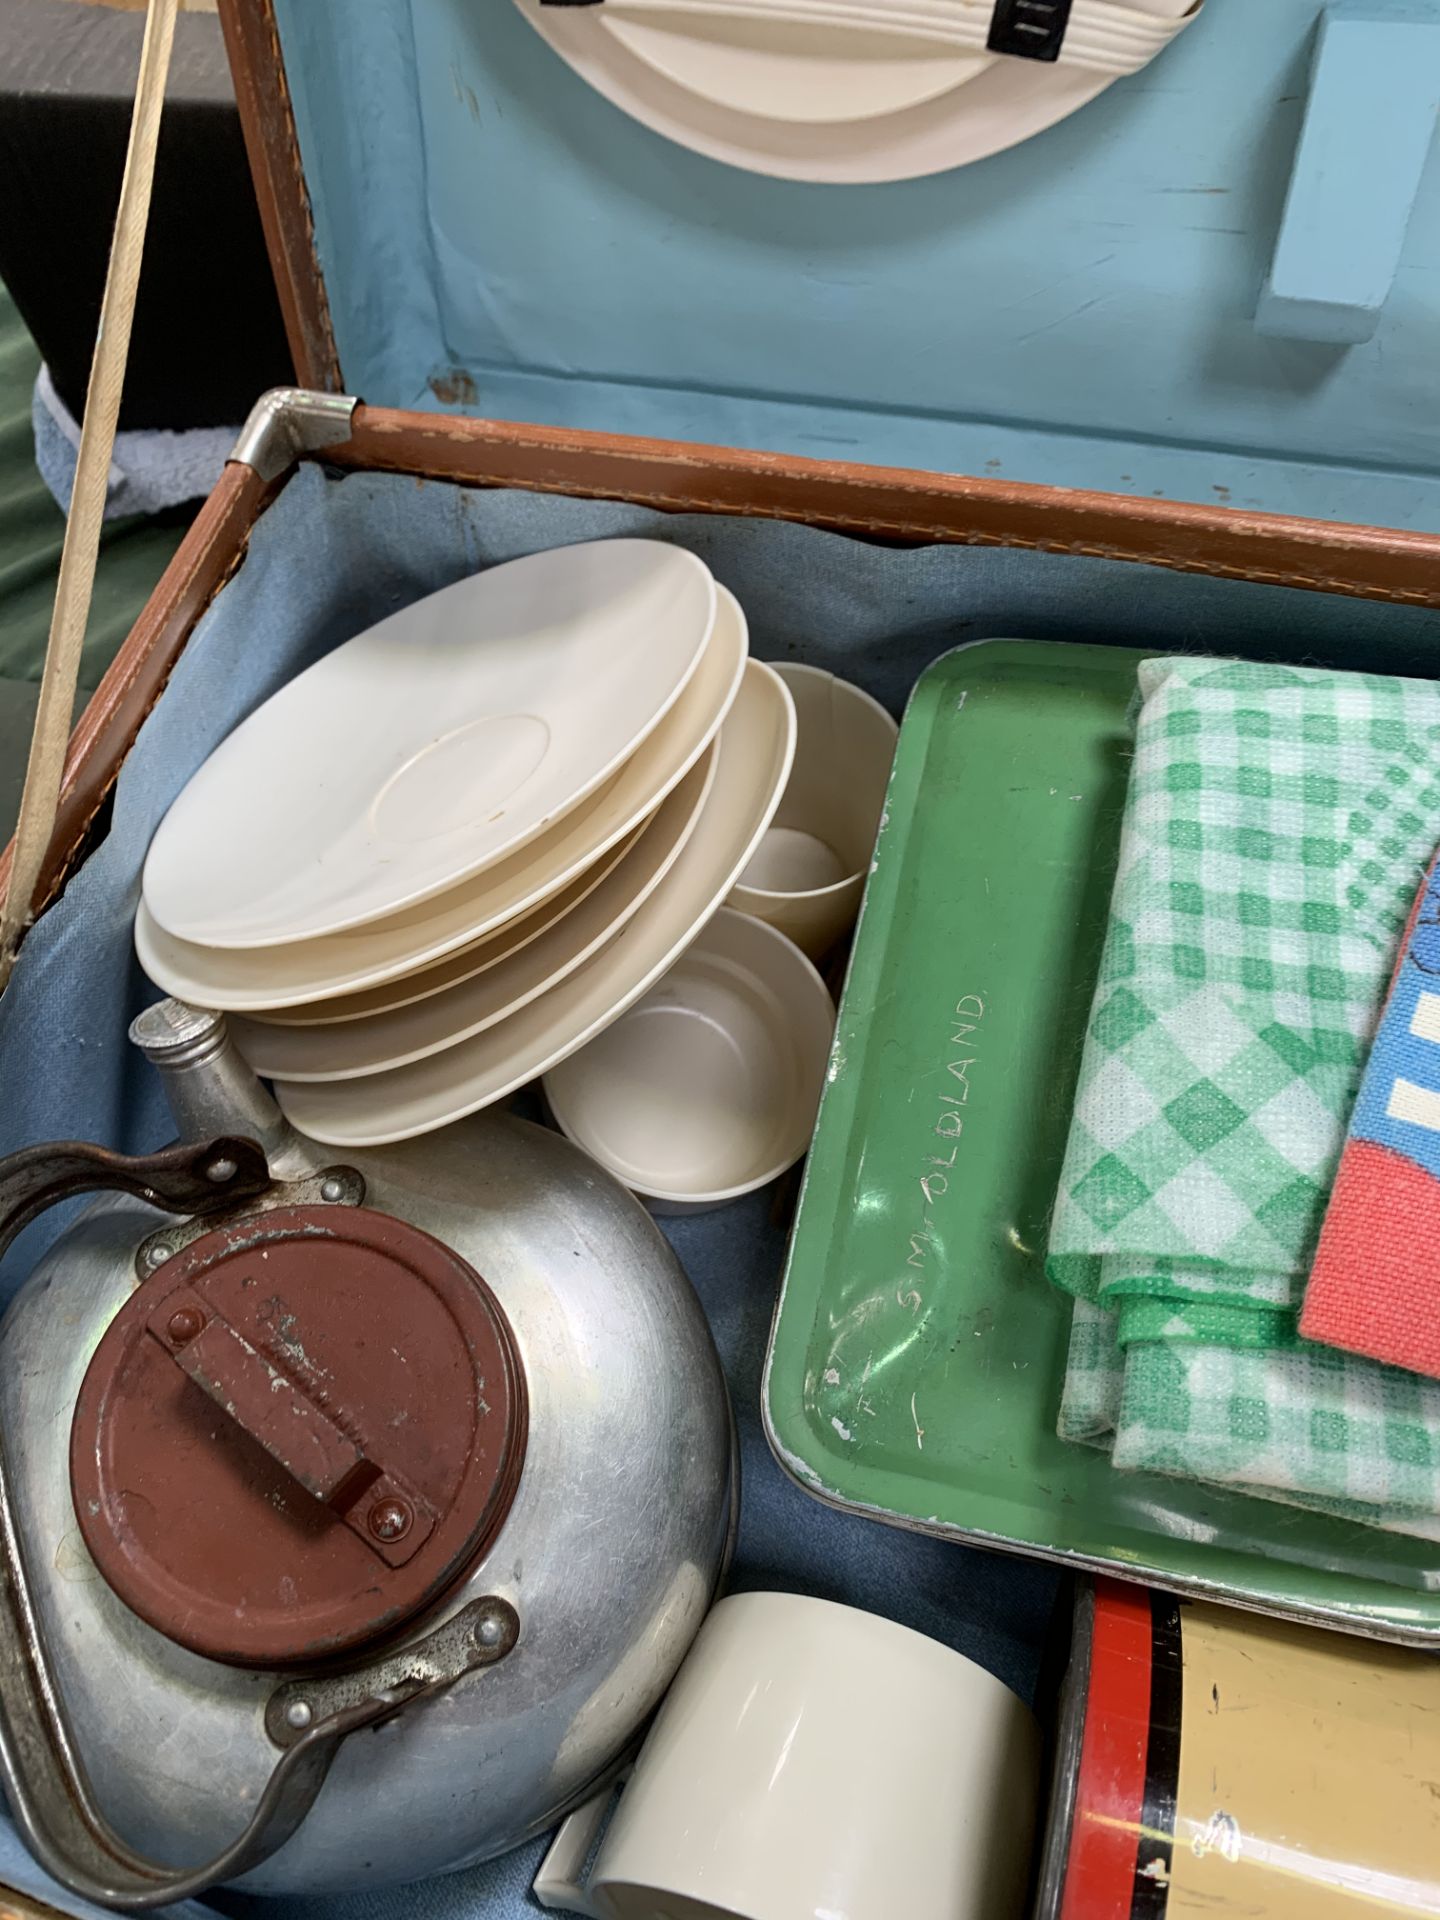 1950's picnic hamper, thermos, plates and cups. - Image 3 of 4